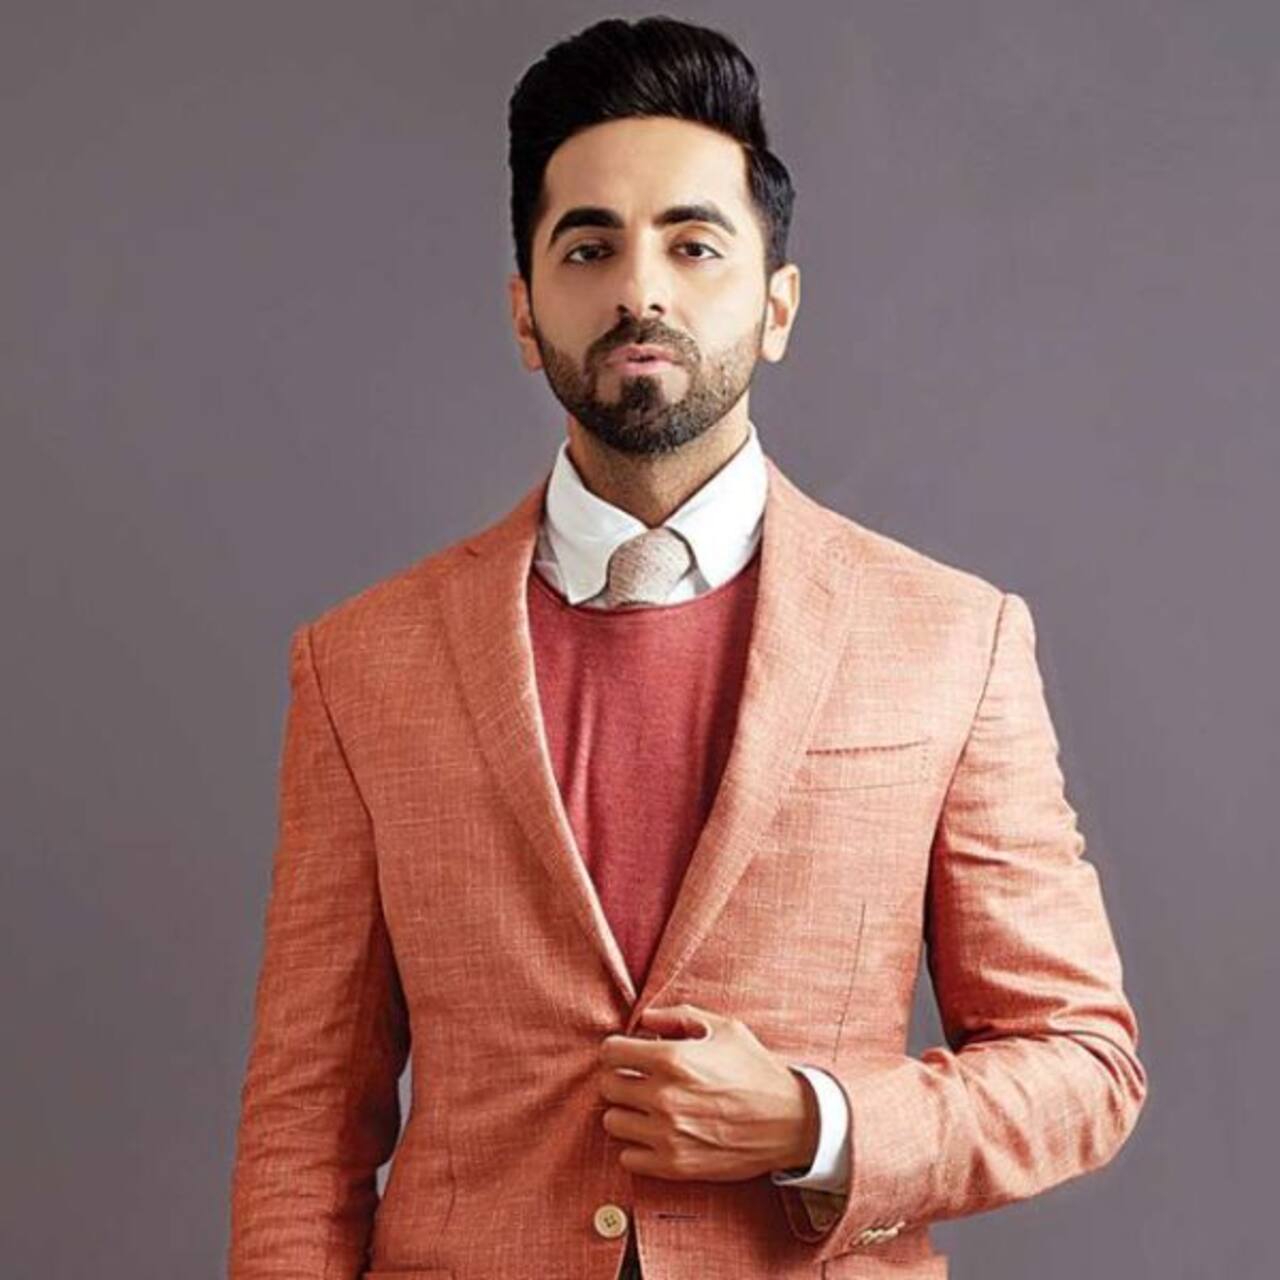 Ayushmann Khurrana reveals the one thing he wants to achieve with his next films Anek, Chandigarh Kare Aashiqui, Doctor G